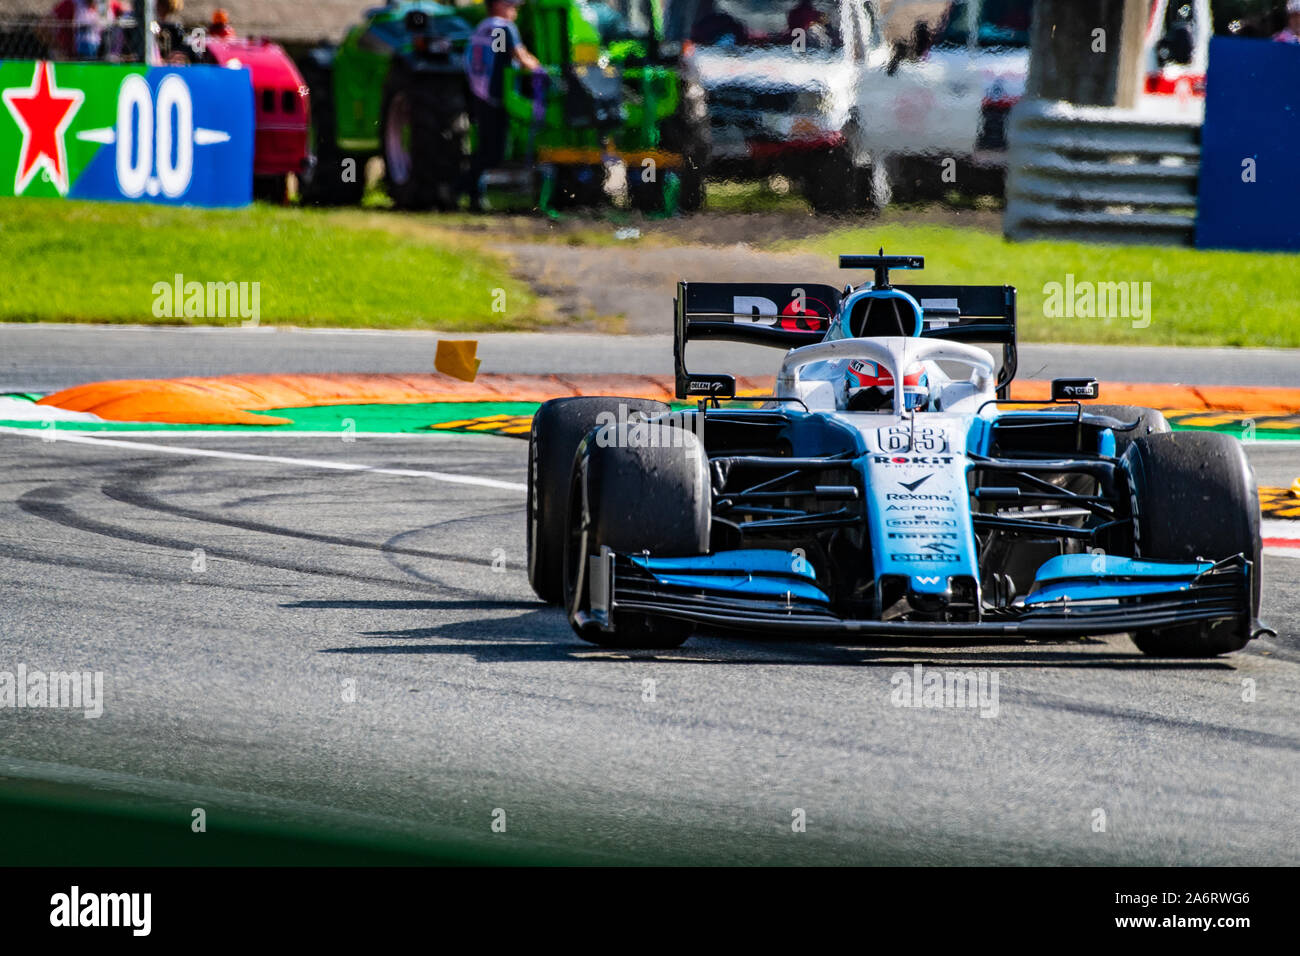 Italy/Monza - 08/09/2019 - #63 George RUSSELL (GBR, Team Williams, FW42) during the Italian Grand Prix Stock Photo